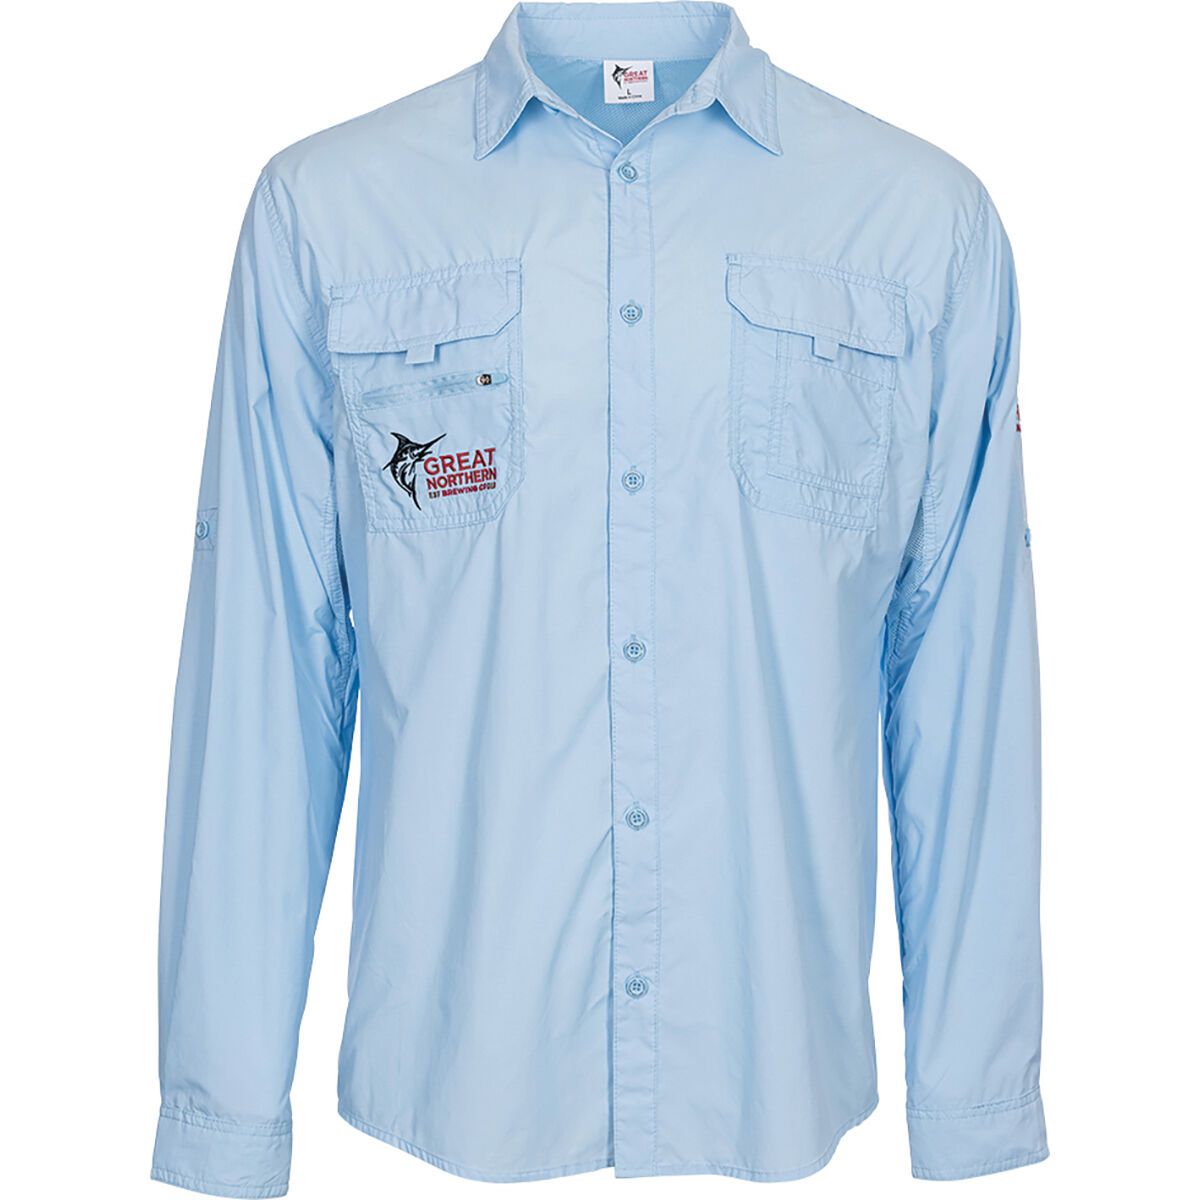 The Great Northern Brewing Co. Men's Long Sleeved Fishing Shirt